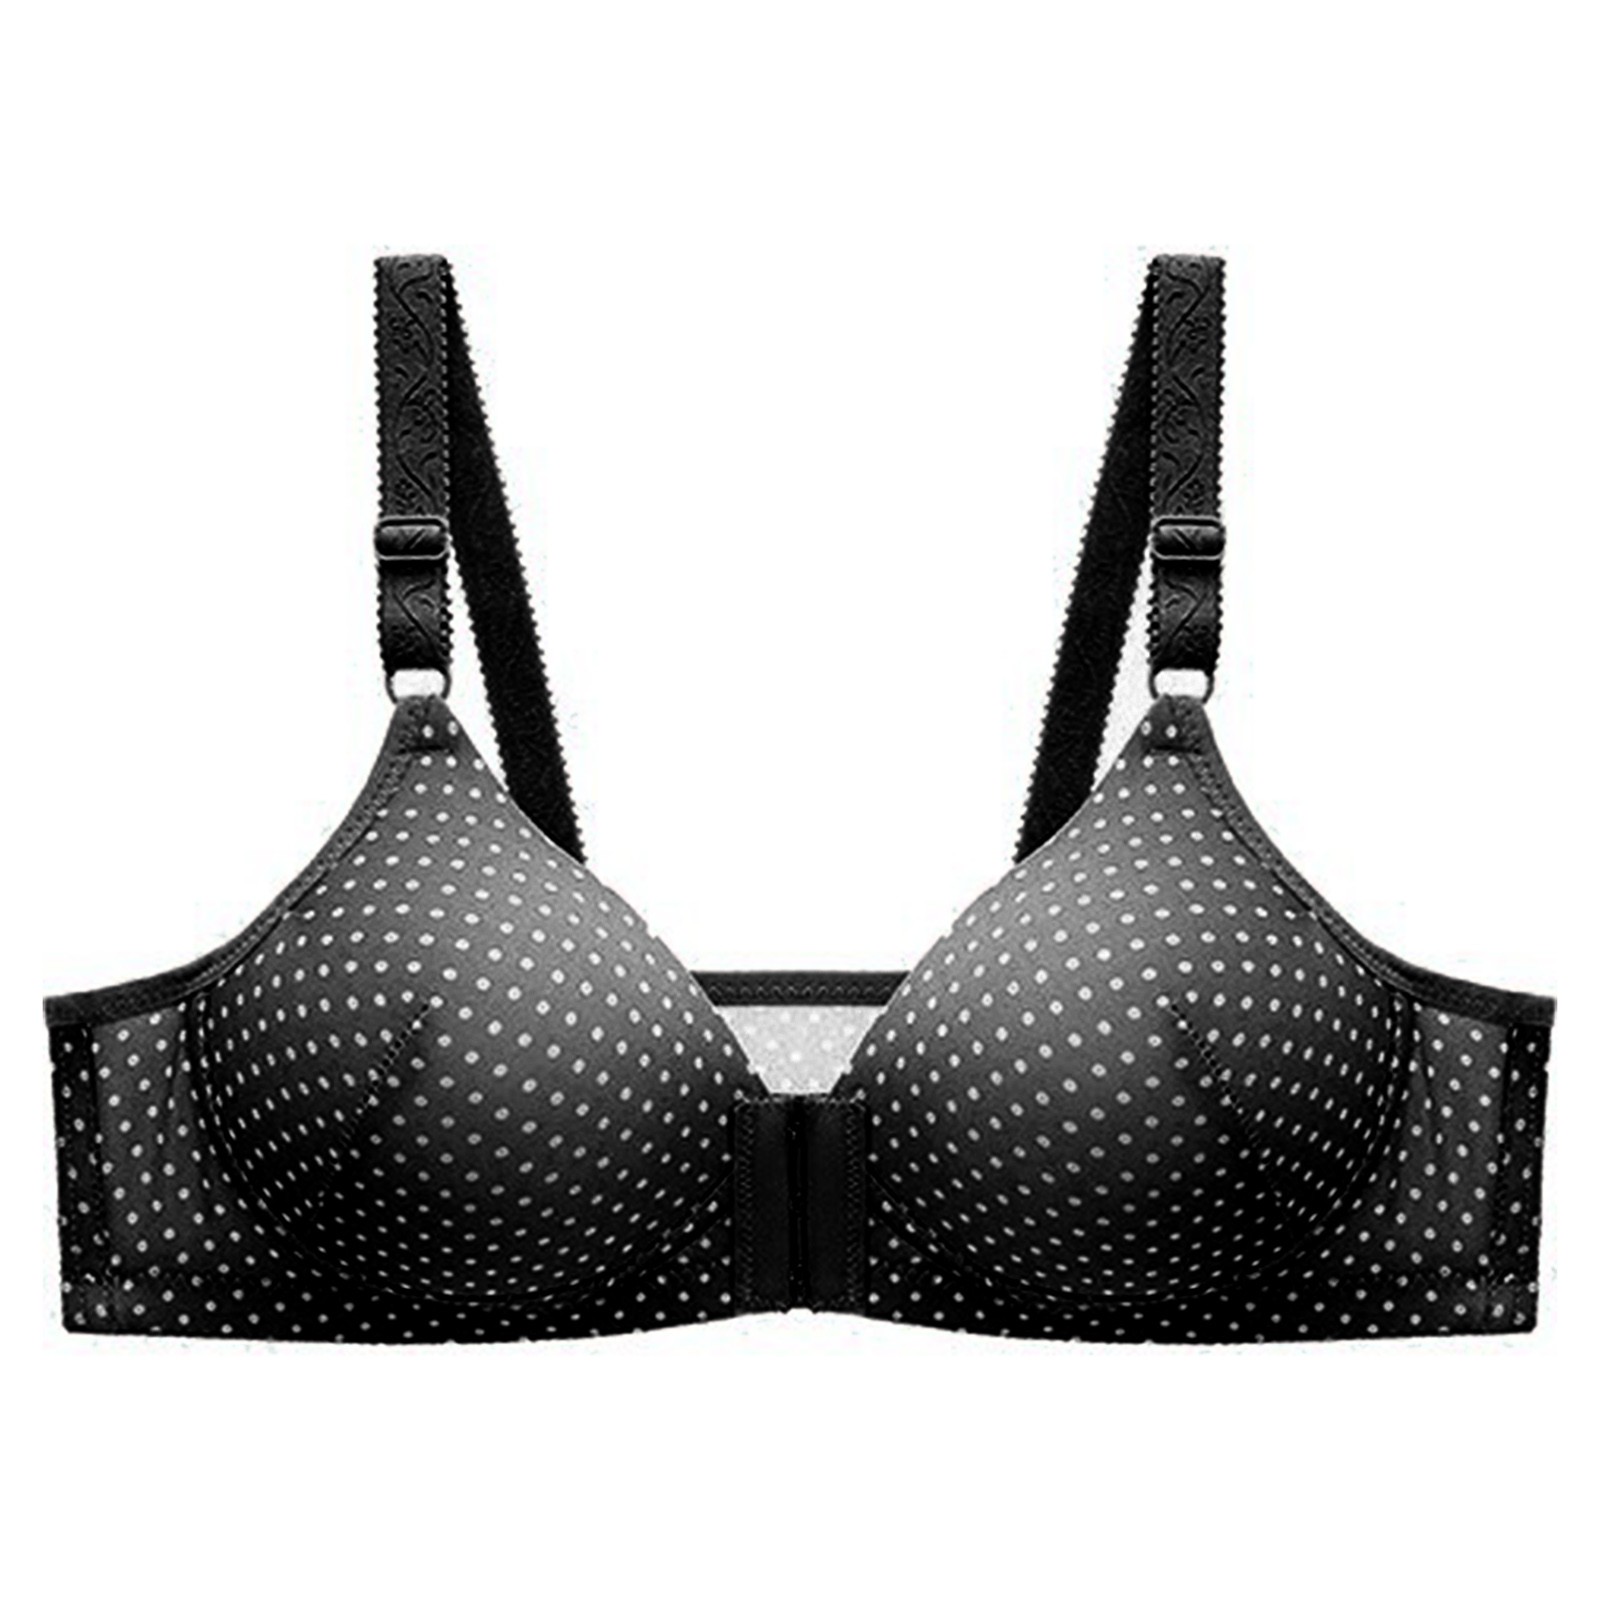 Gzea Comfortable Bras for Women Comfortable Front Buckle Style With No ...